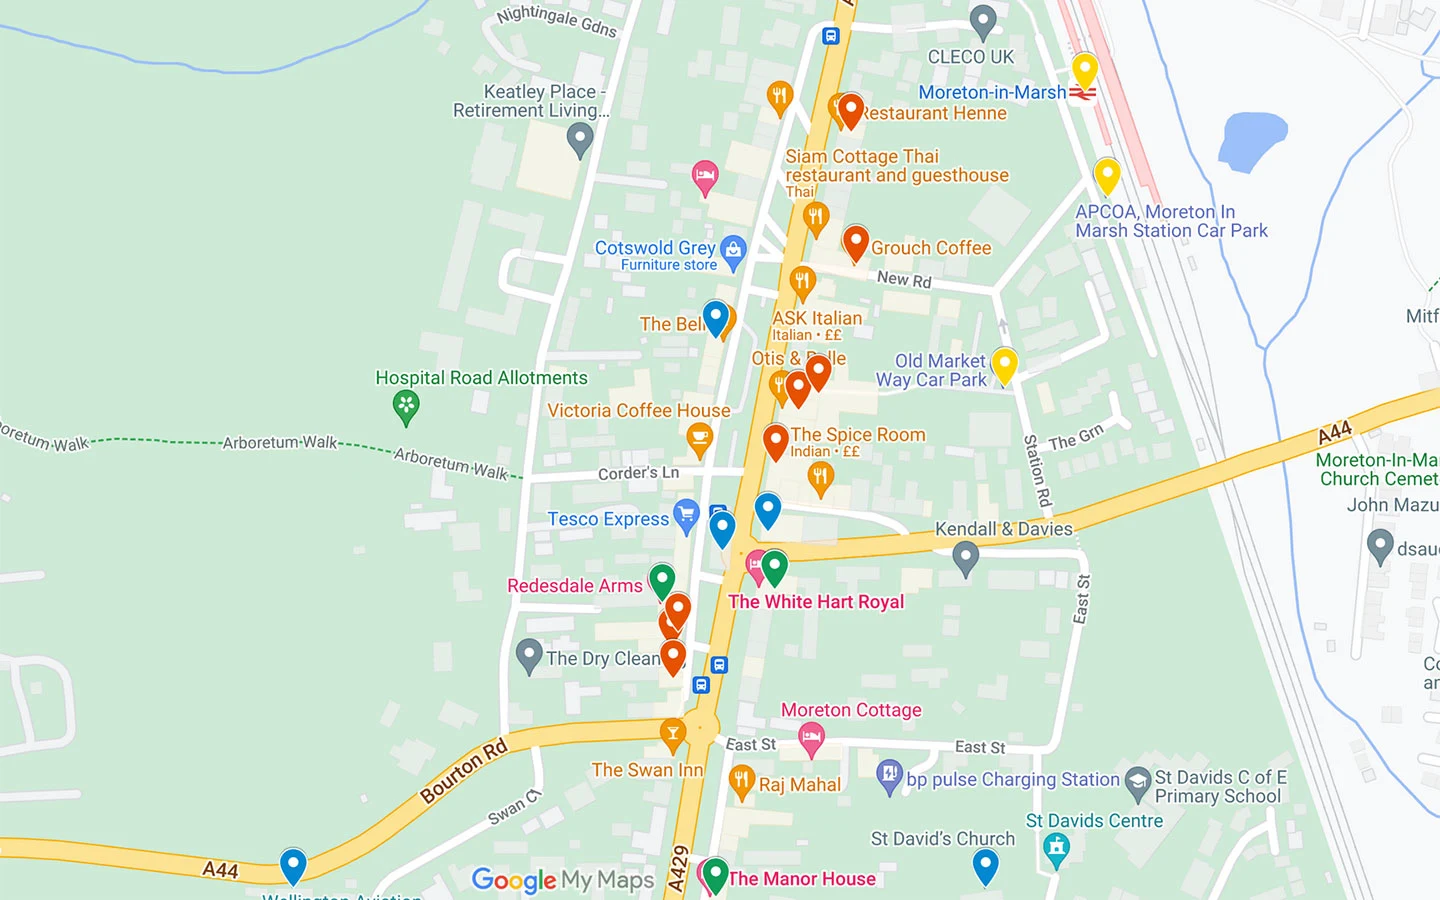 Map of things to do in Moreton-in-Marsh, Cotswolds